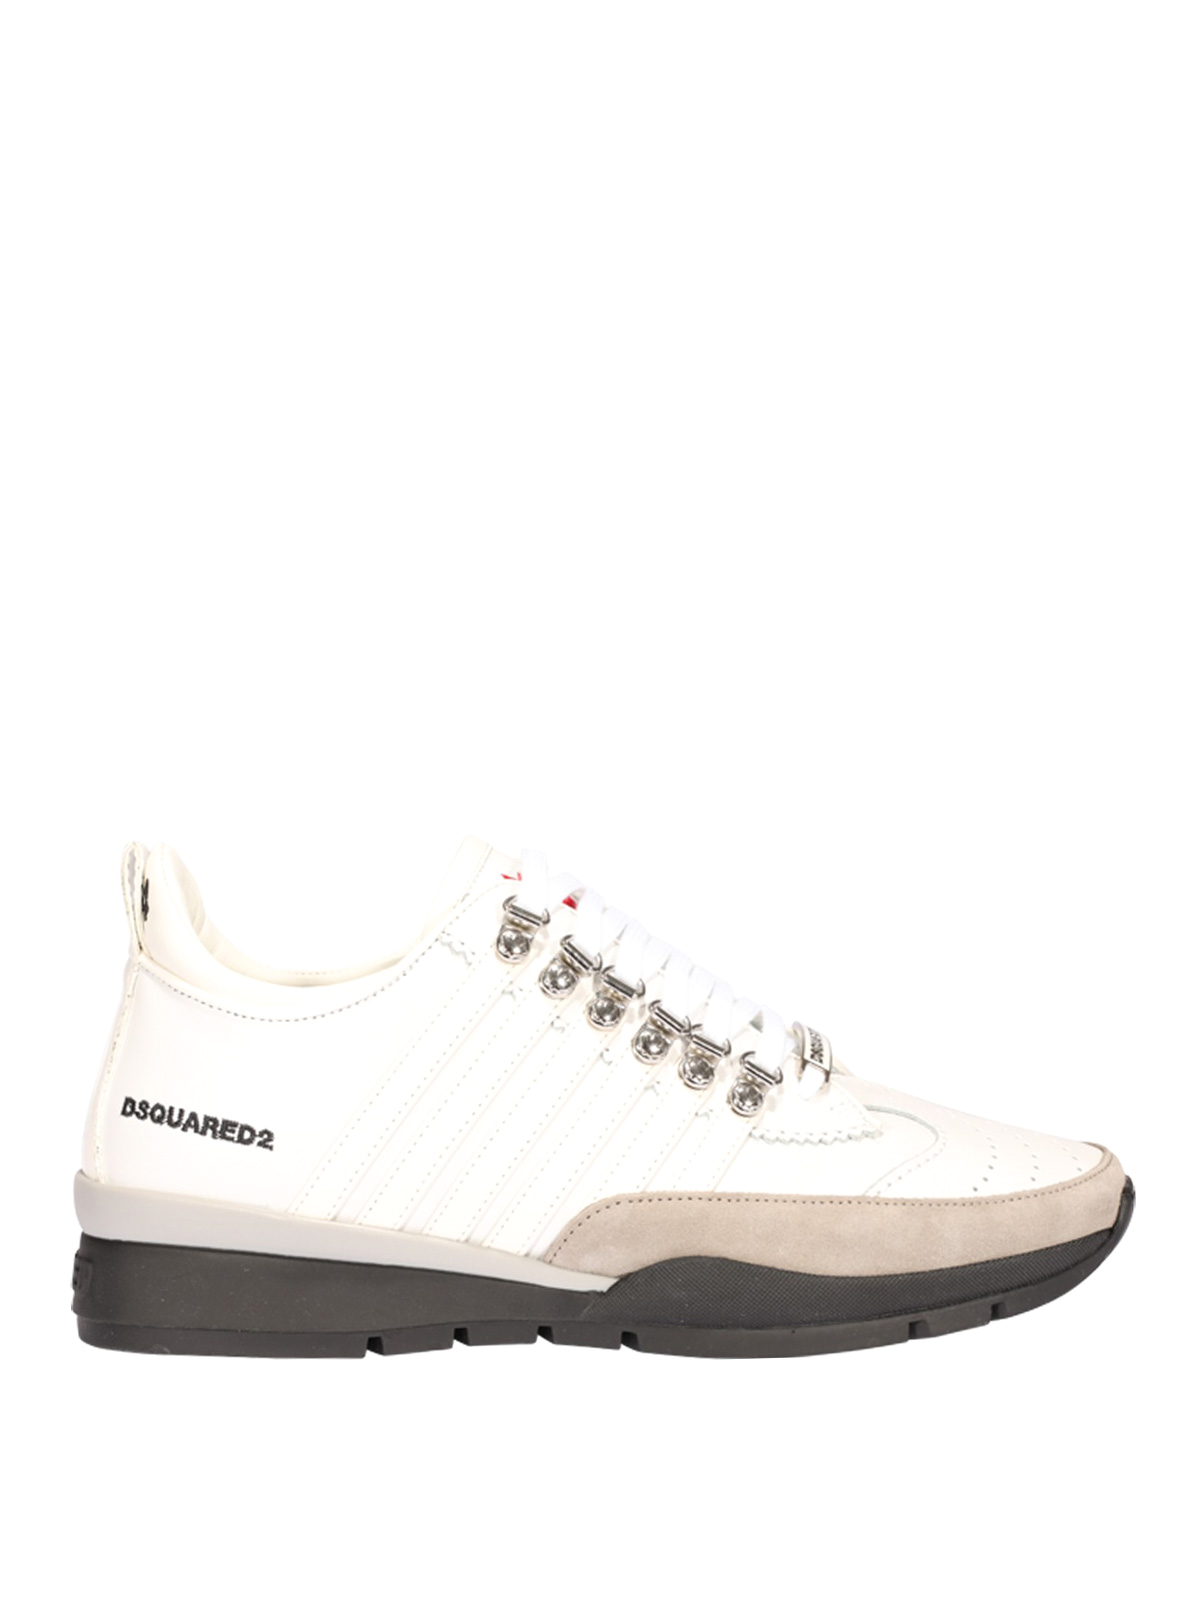 DSQUARED2 251 RED LOGO WHITE LEATHER SNEAKERS